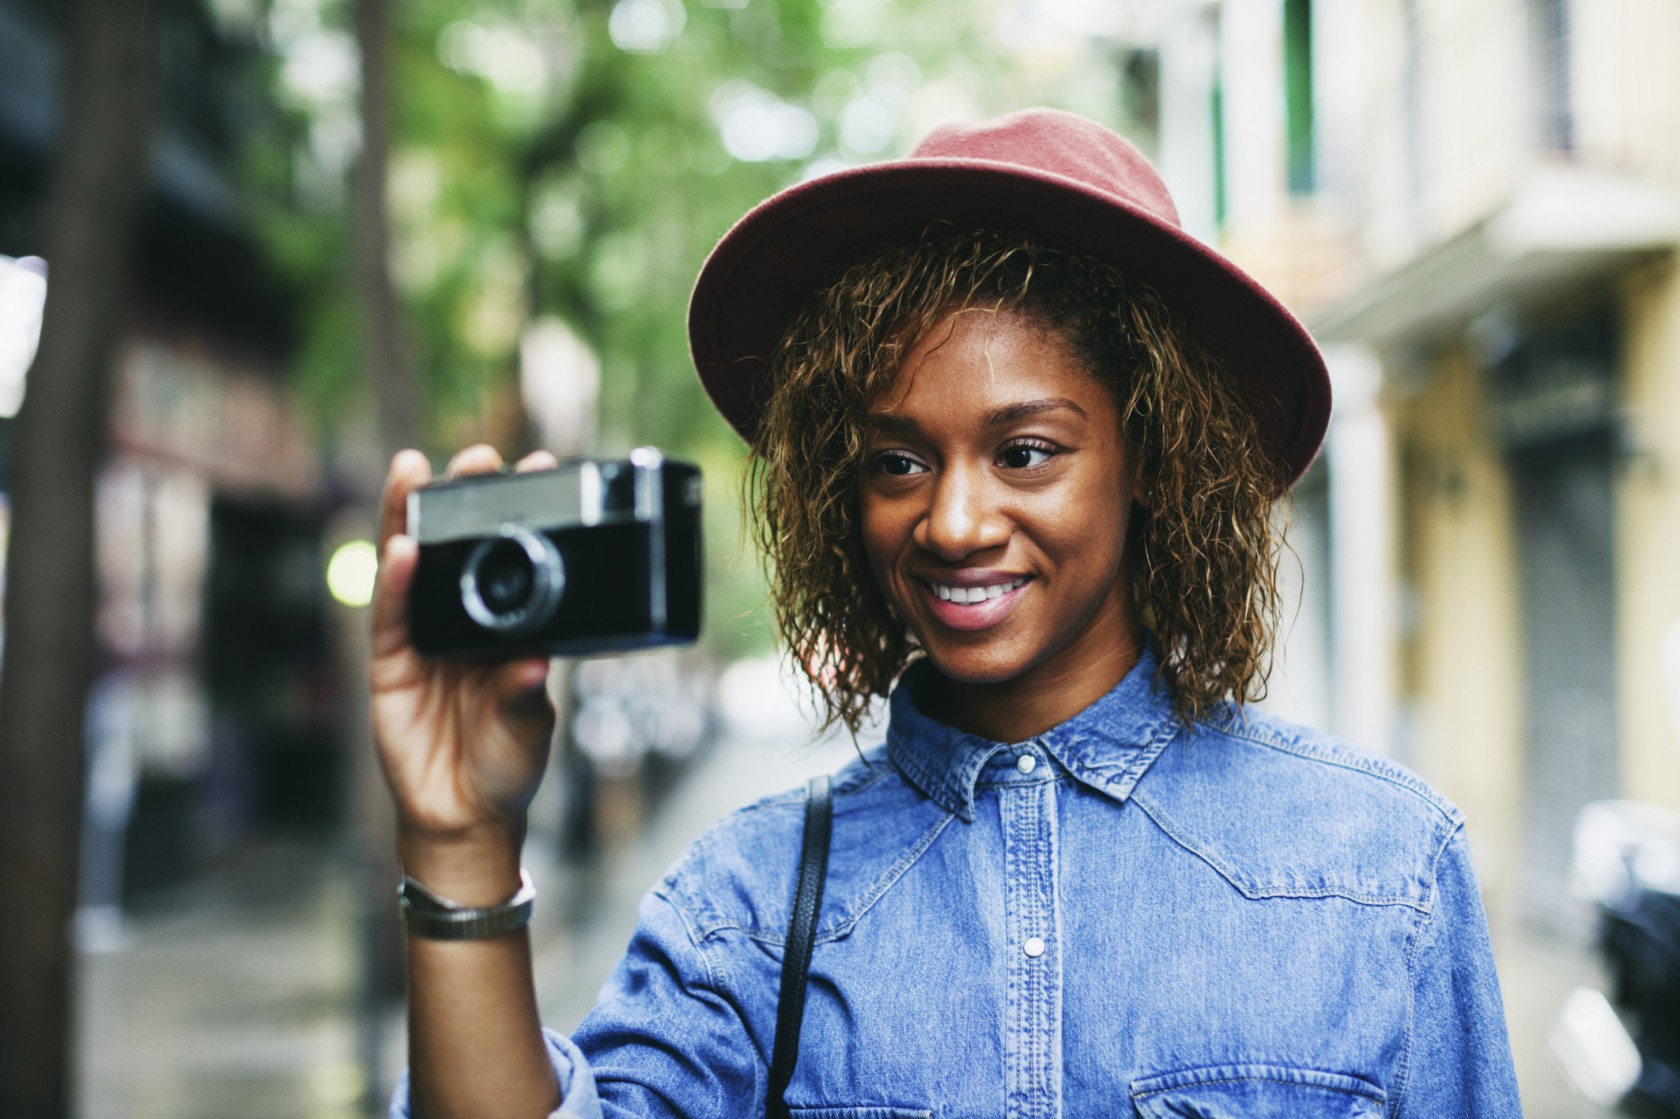 Portrait of smiling young woman wearing hat and denim shirt holding camera